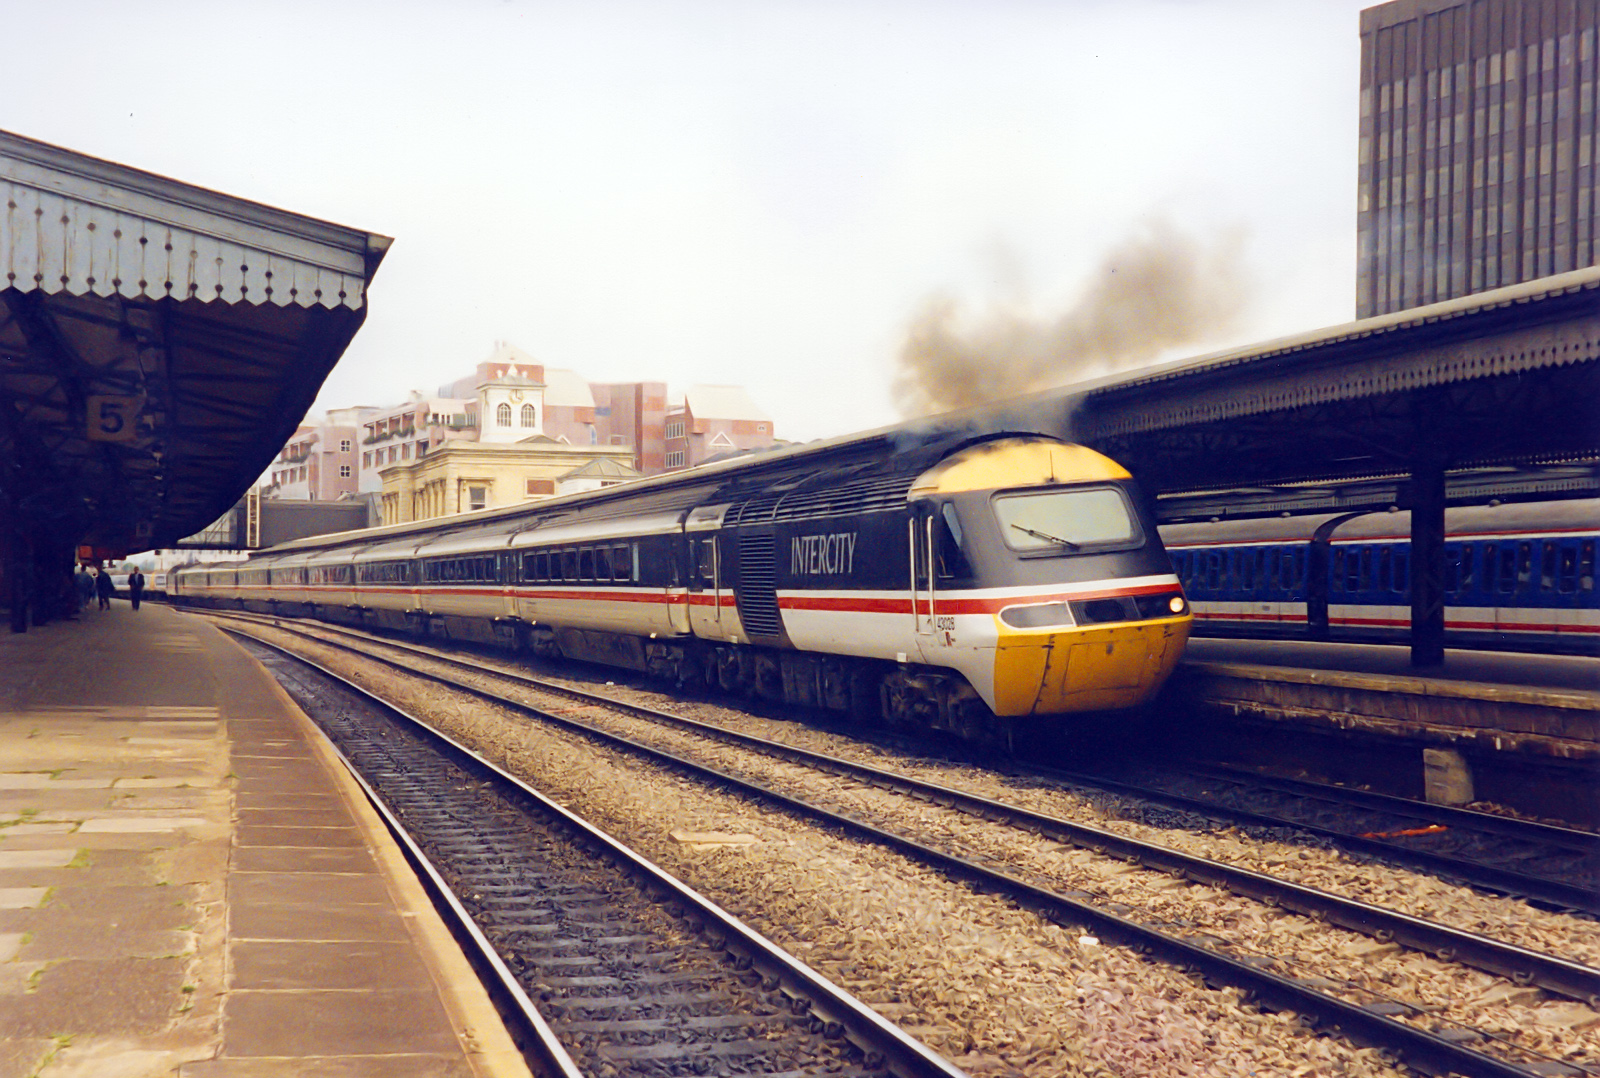 A westbound Intercity Swallow liveried HST, led by power car 43028, departs from Reading.